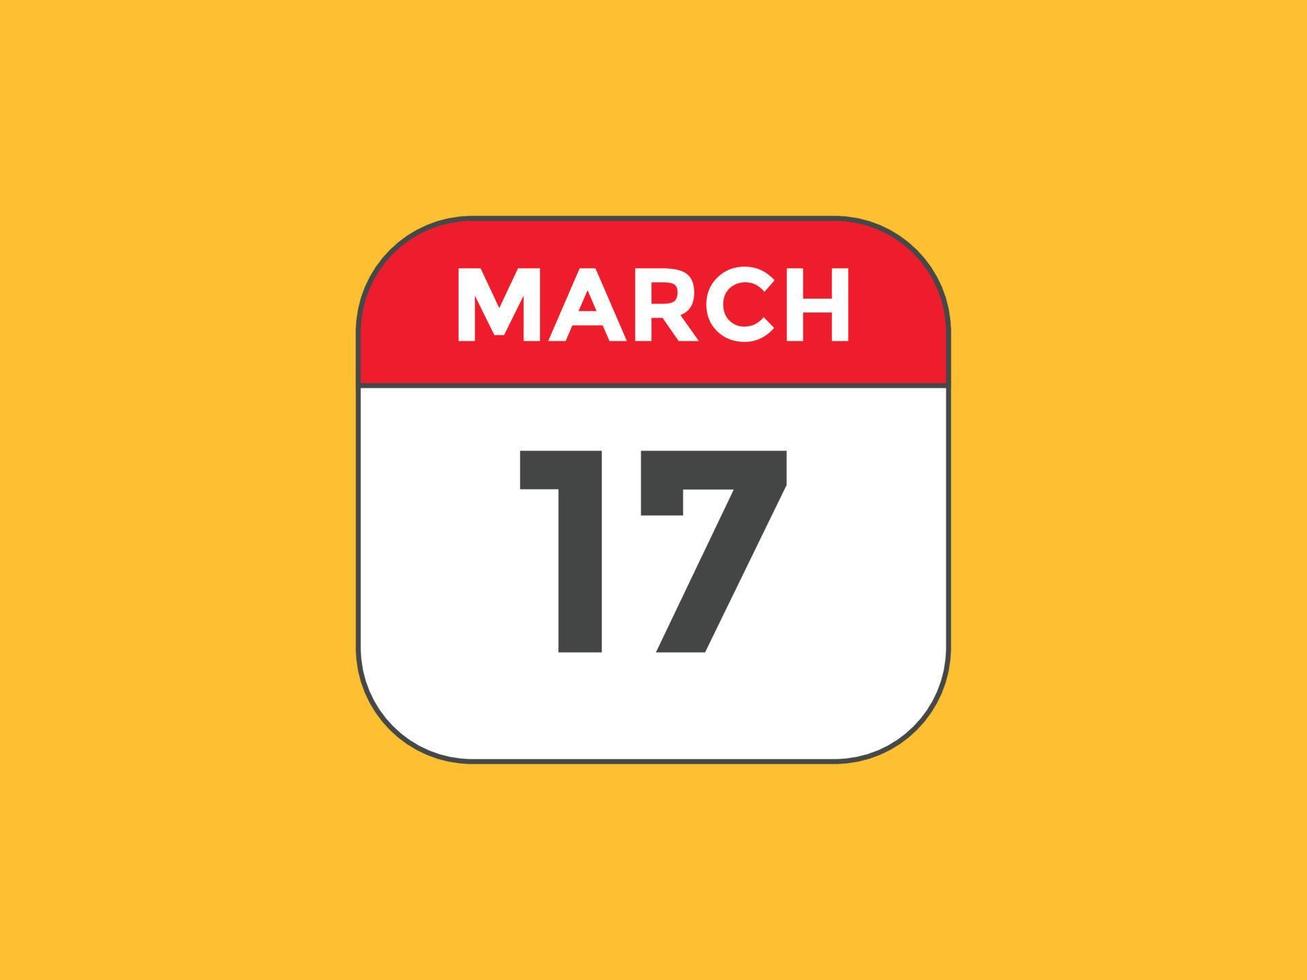 march 17 calendar reminder. 17th march daily calendar icon template. Calendar 17th march icon Design template. Vector illustration